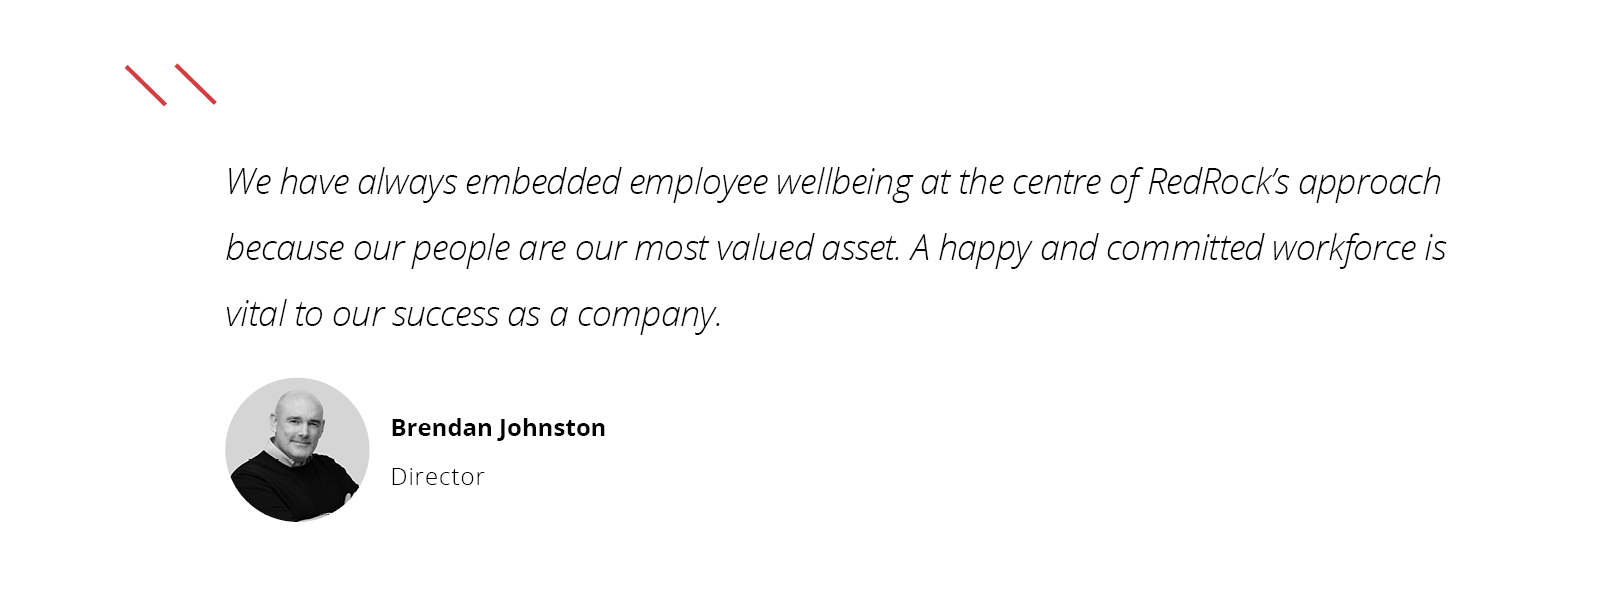 “We have always embedded employee wellbeing at the centre of RedRock's approach because our people are our most valued asset. A happy and committed workforce is vital to our success as a company.”   BRENDAN OHNSTON, IRECTOR